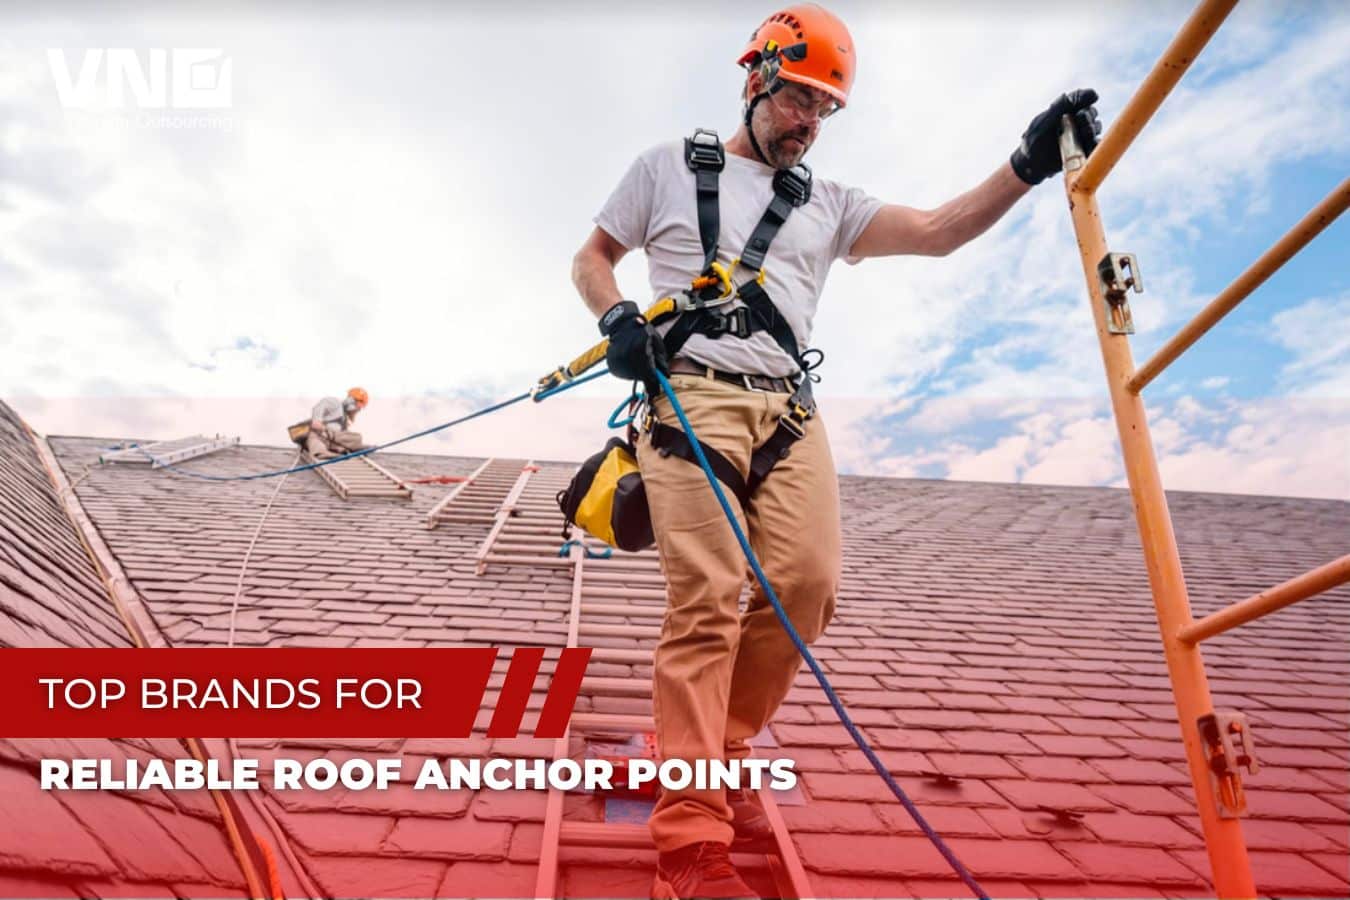 Top Brands for Reliable Roof Anchor Points